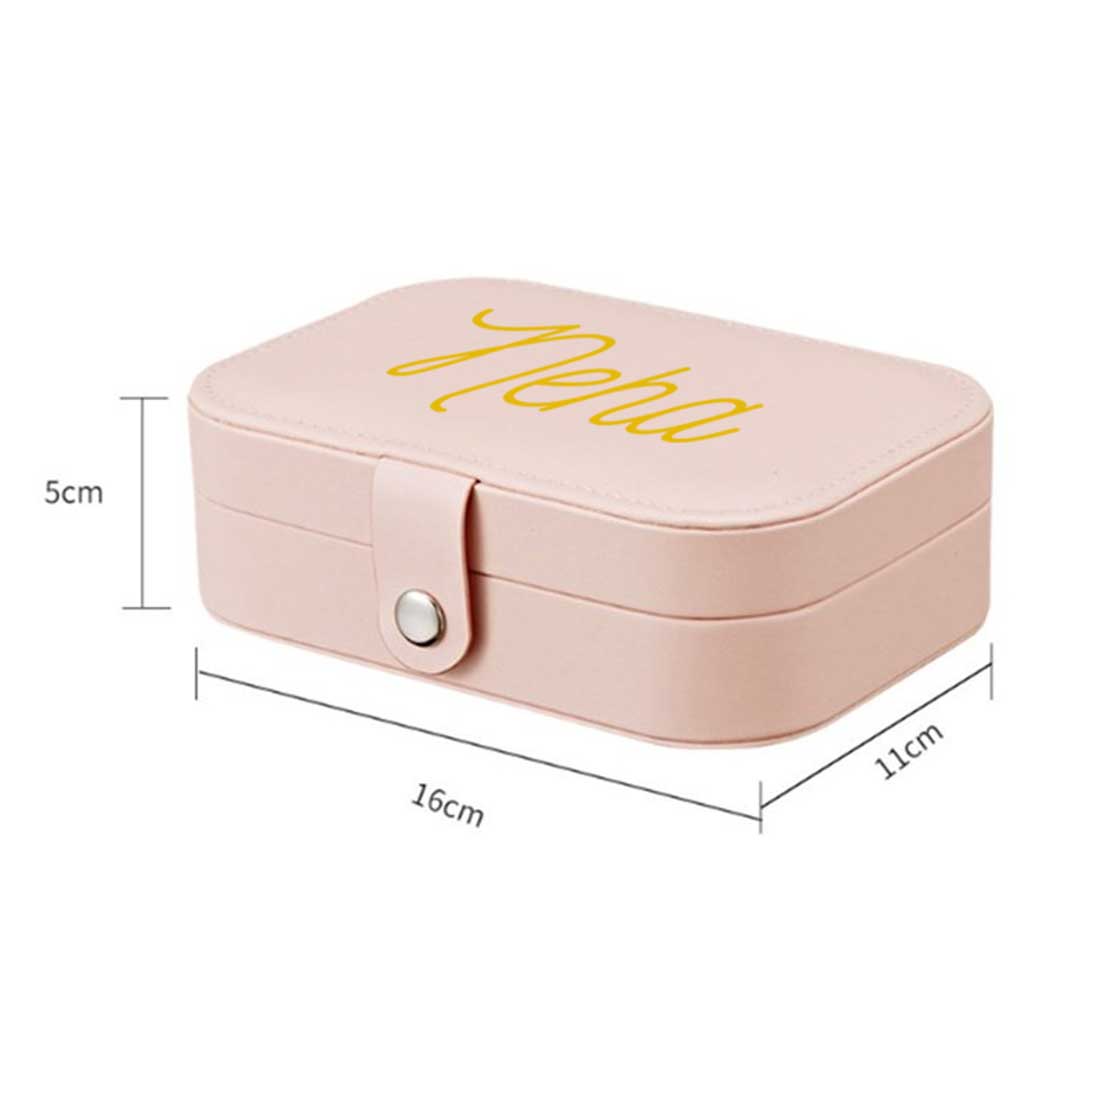 Personalized Jewellery Box Organizer For Travel jewelry Case for Earrings Pendant - Add Name